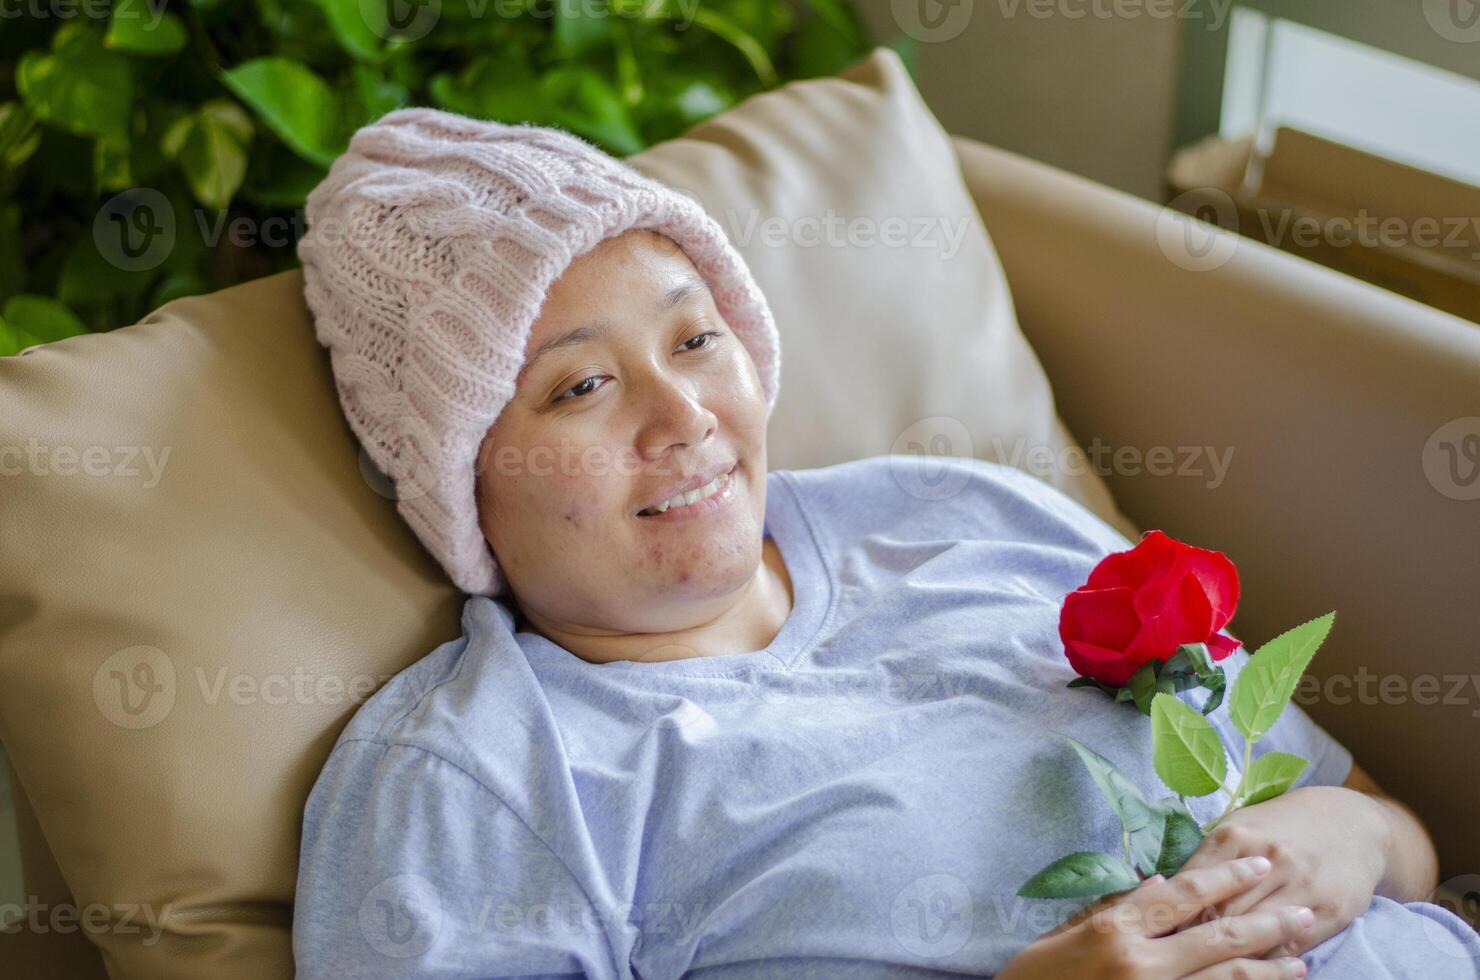 Asian woman with cancer, she is lying on the sofa in the living room, smiling and happy after receiving roses as encouragement. photo